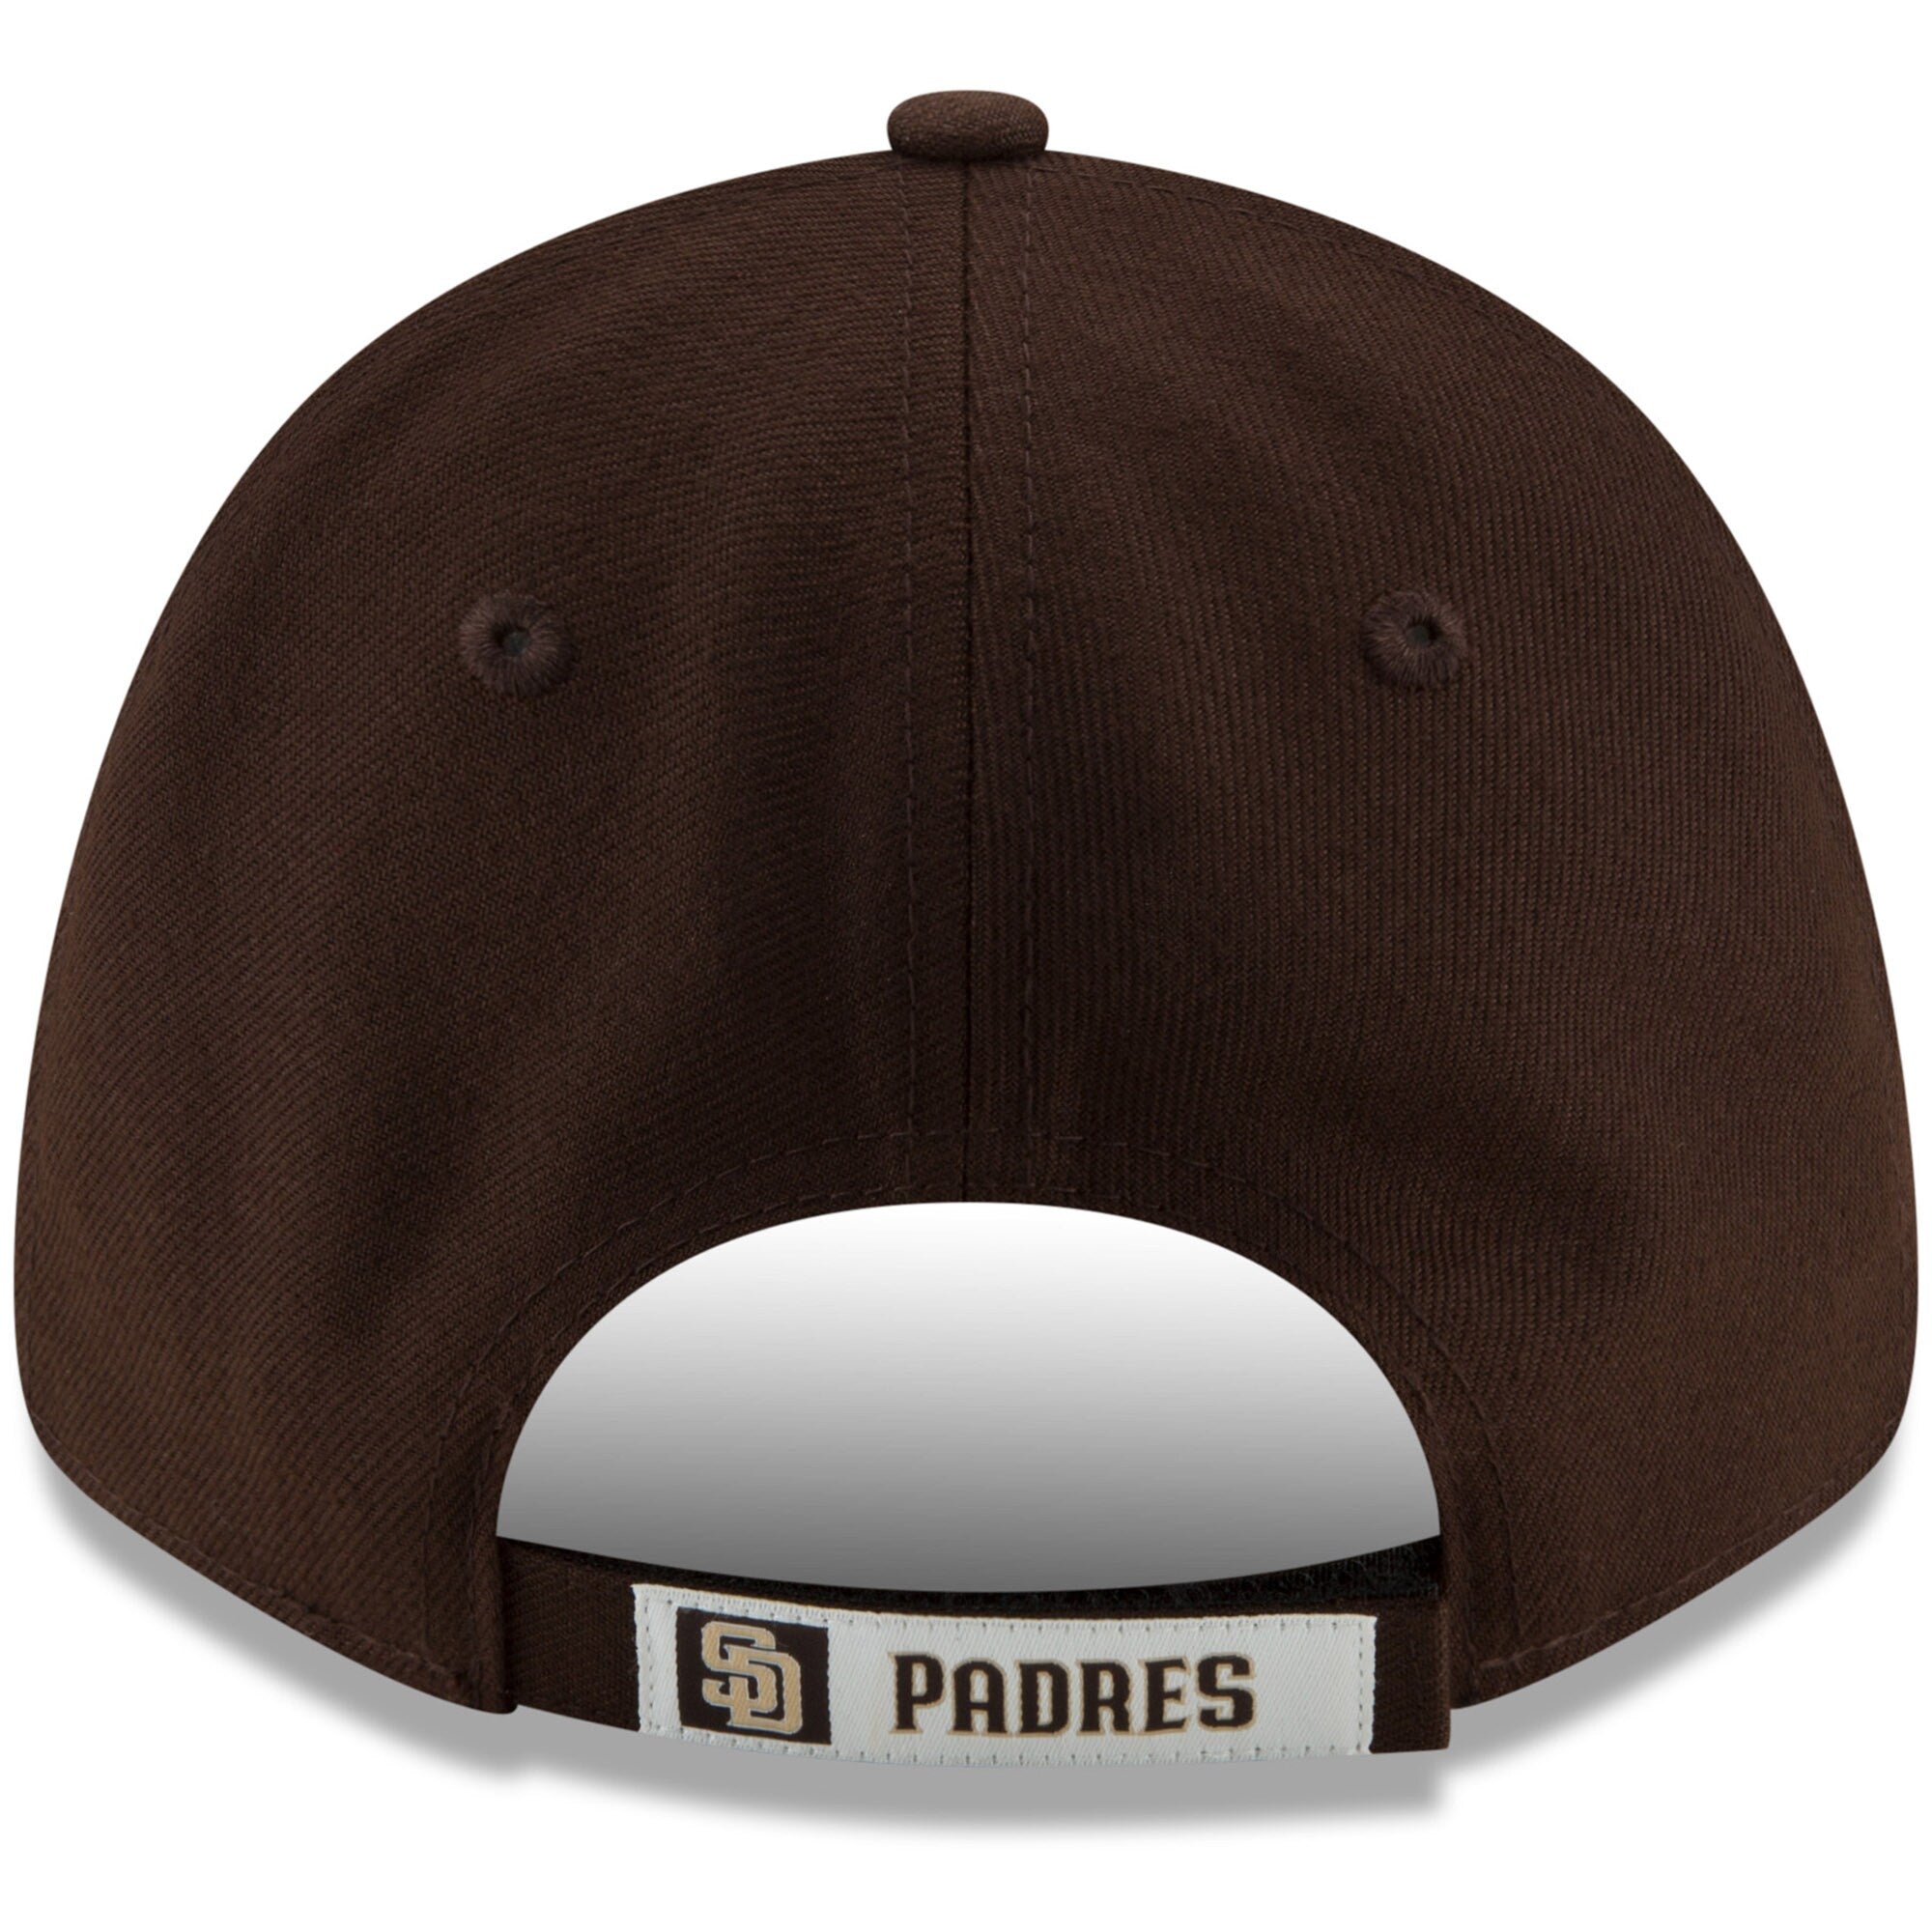 New Era Officially Licensed League MLB San Diego Padres Men's White/Brown Hat